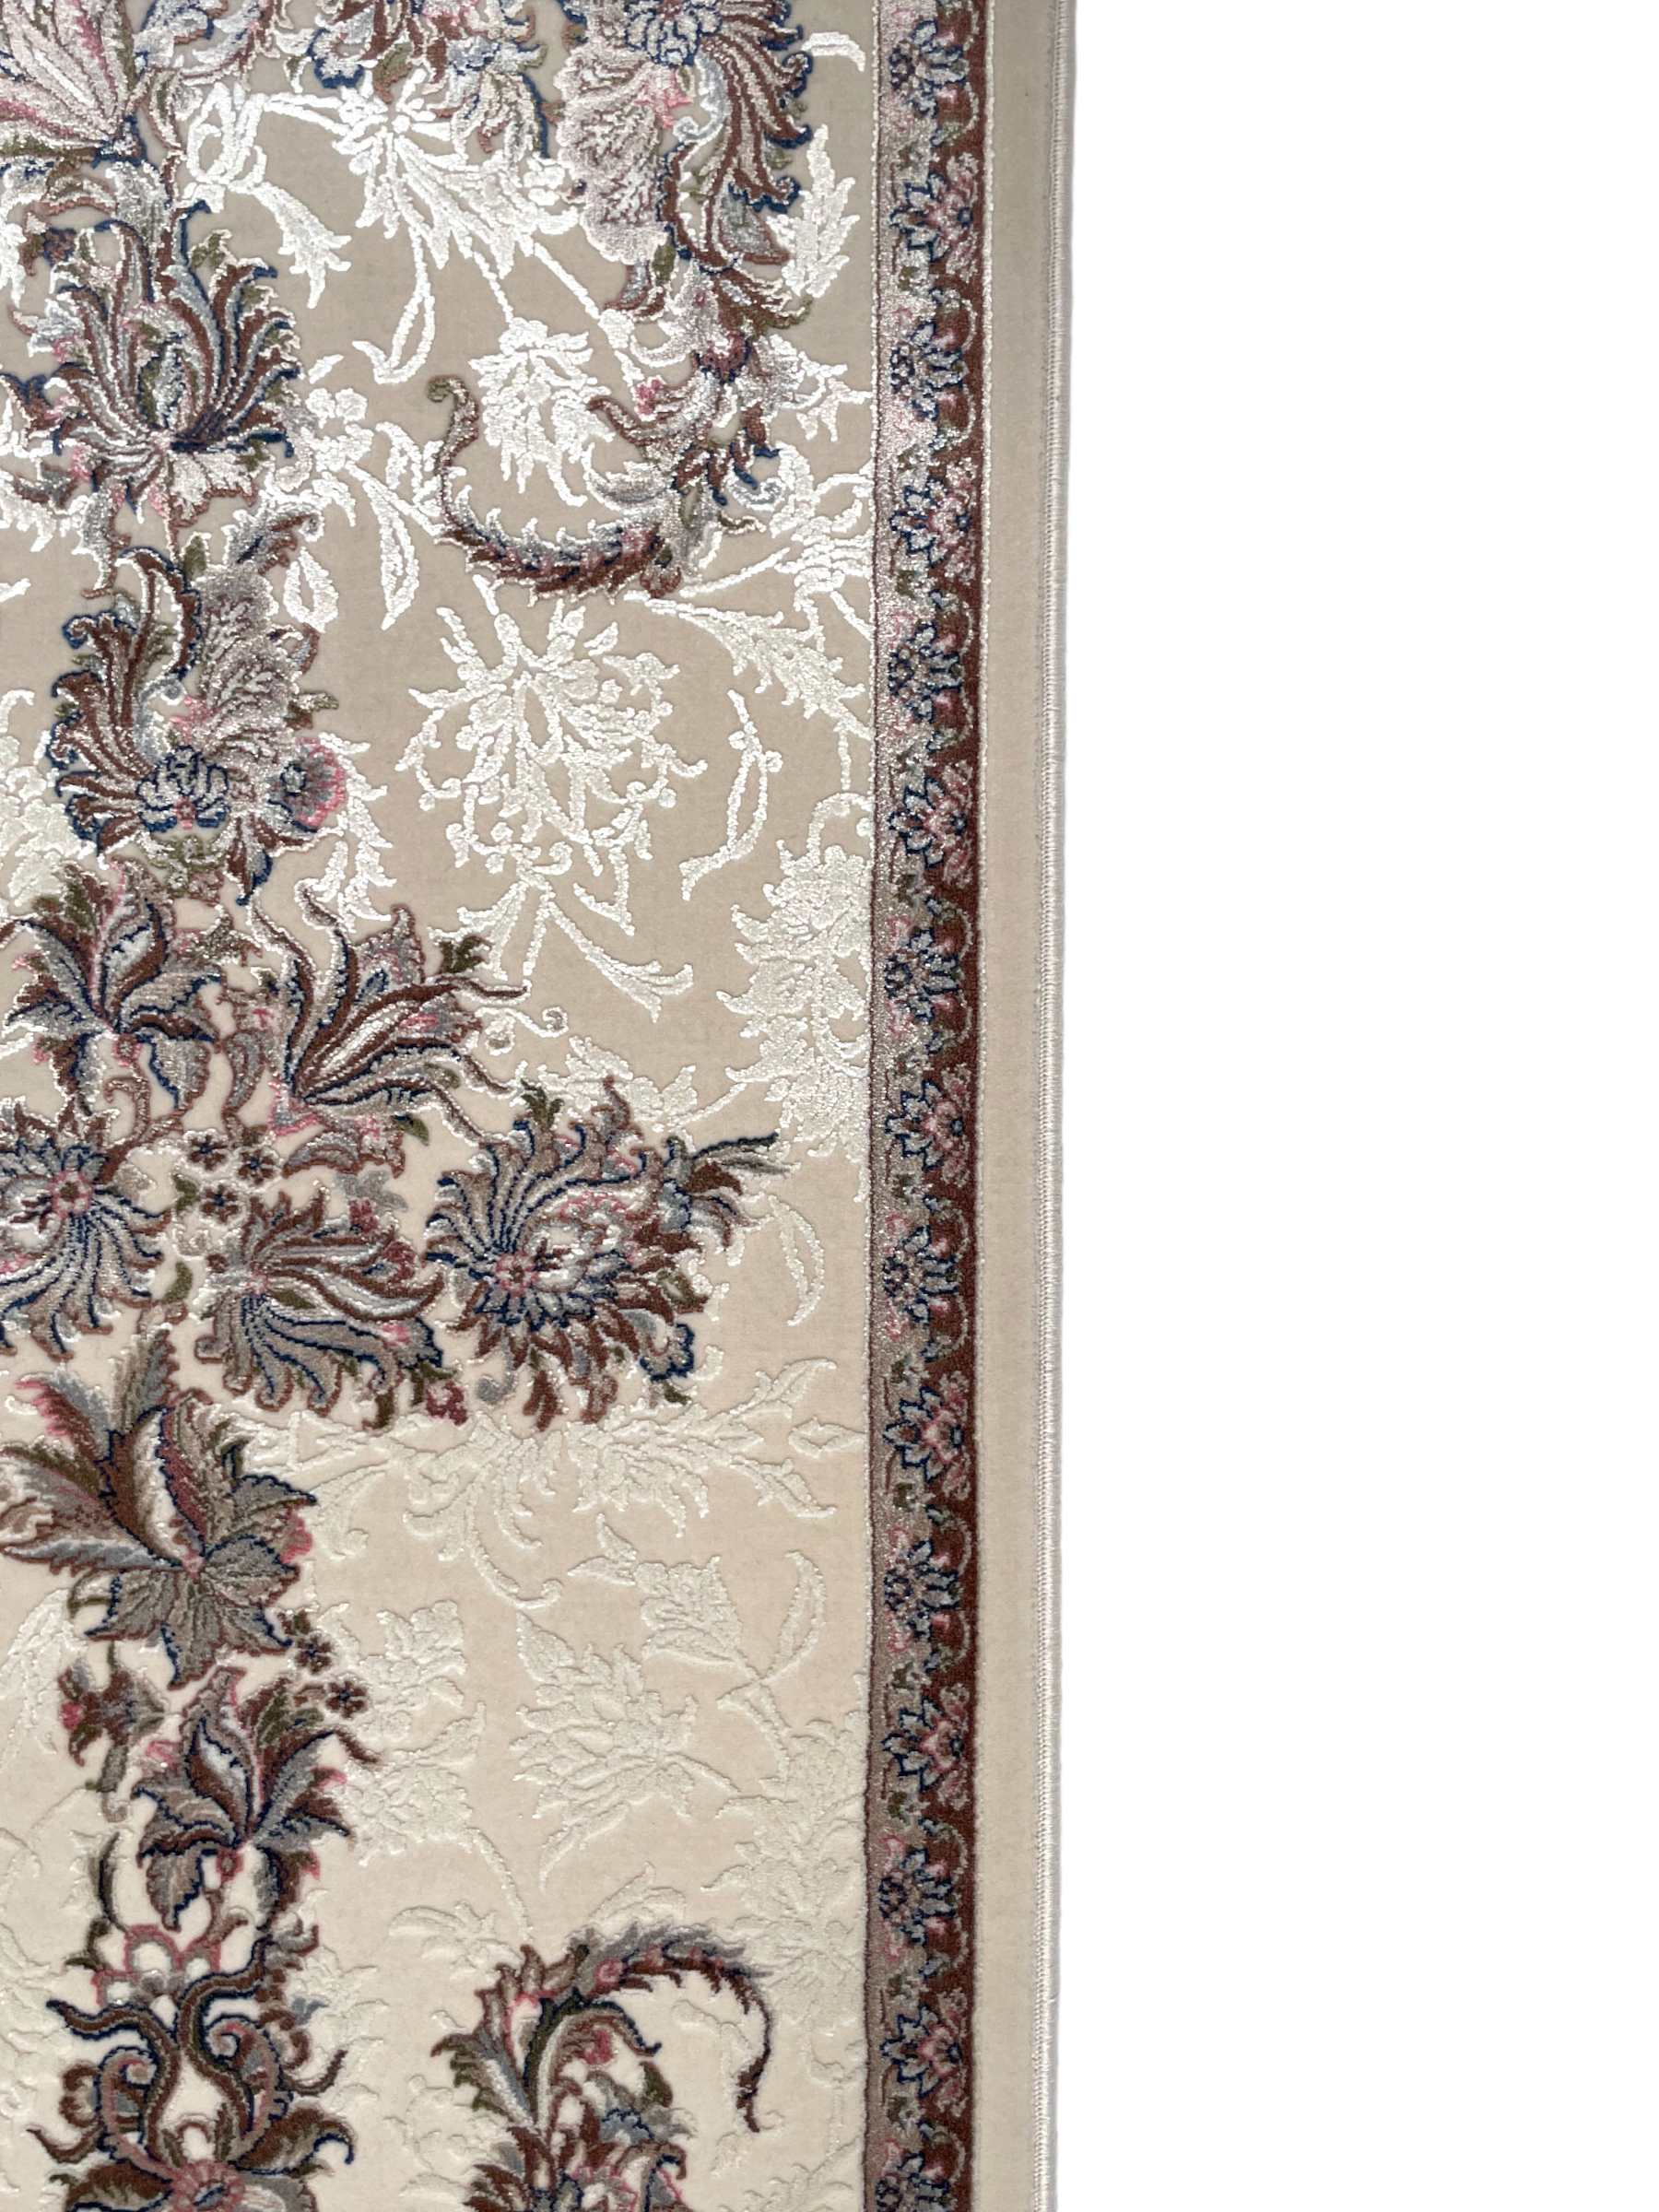 The Ishara rug displays the traditional Islamic "mihrab" design with a textured floral pattern.